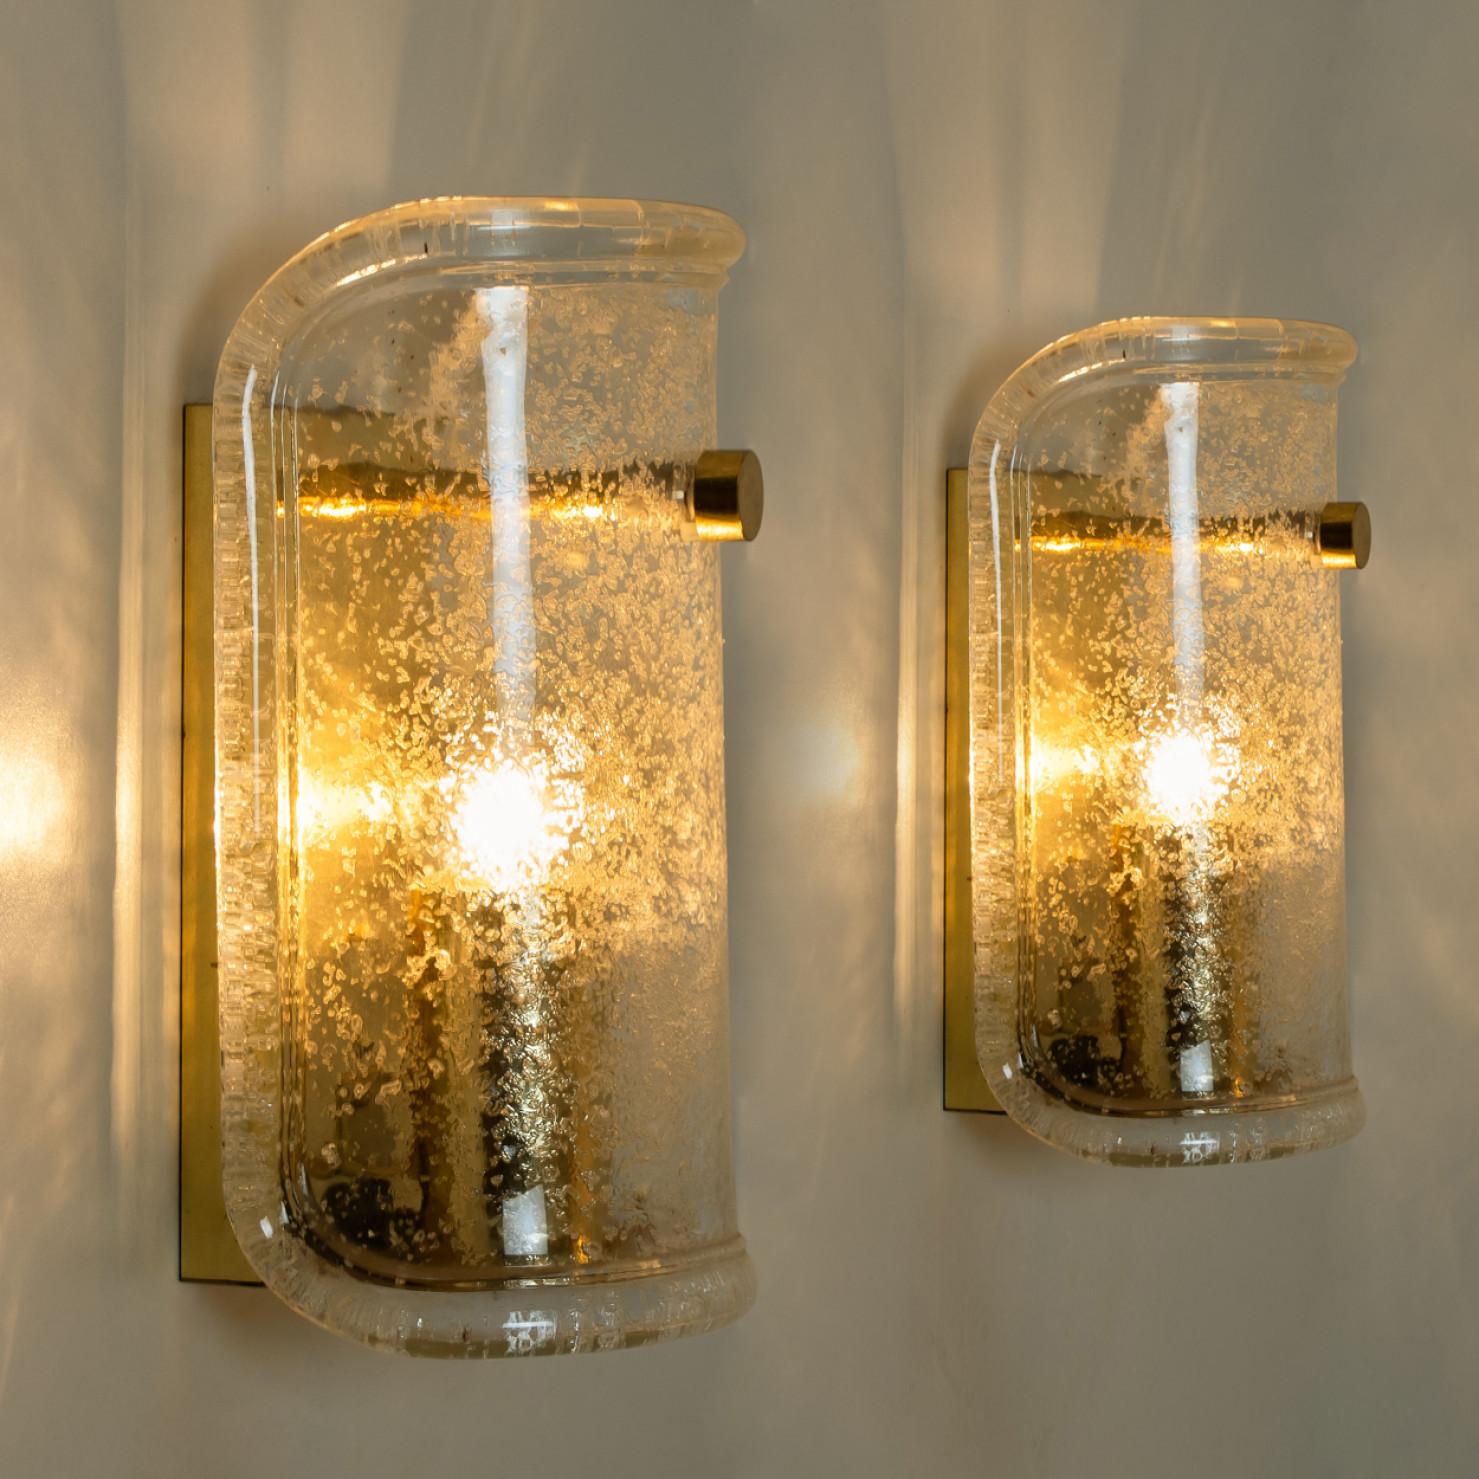 Murano Wall Light Fixtures by Hillebrand, Germany, 1960s For Sale 1